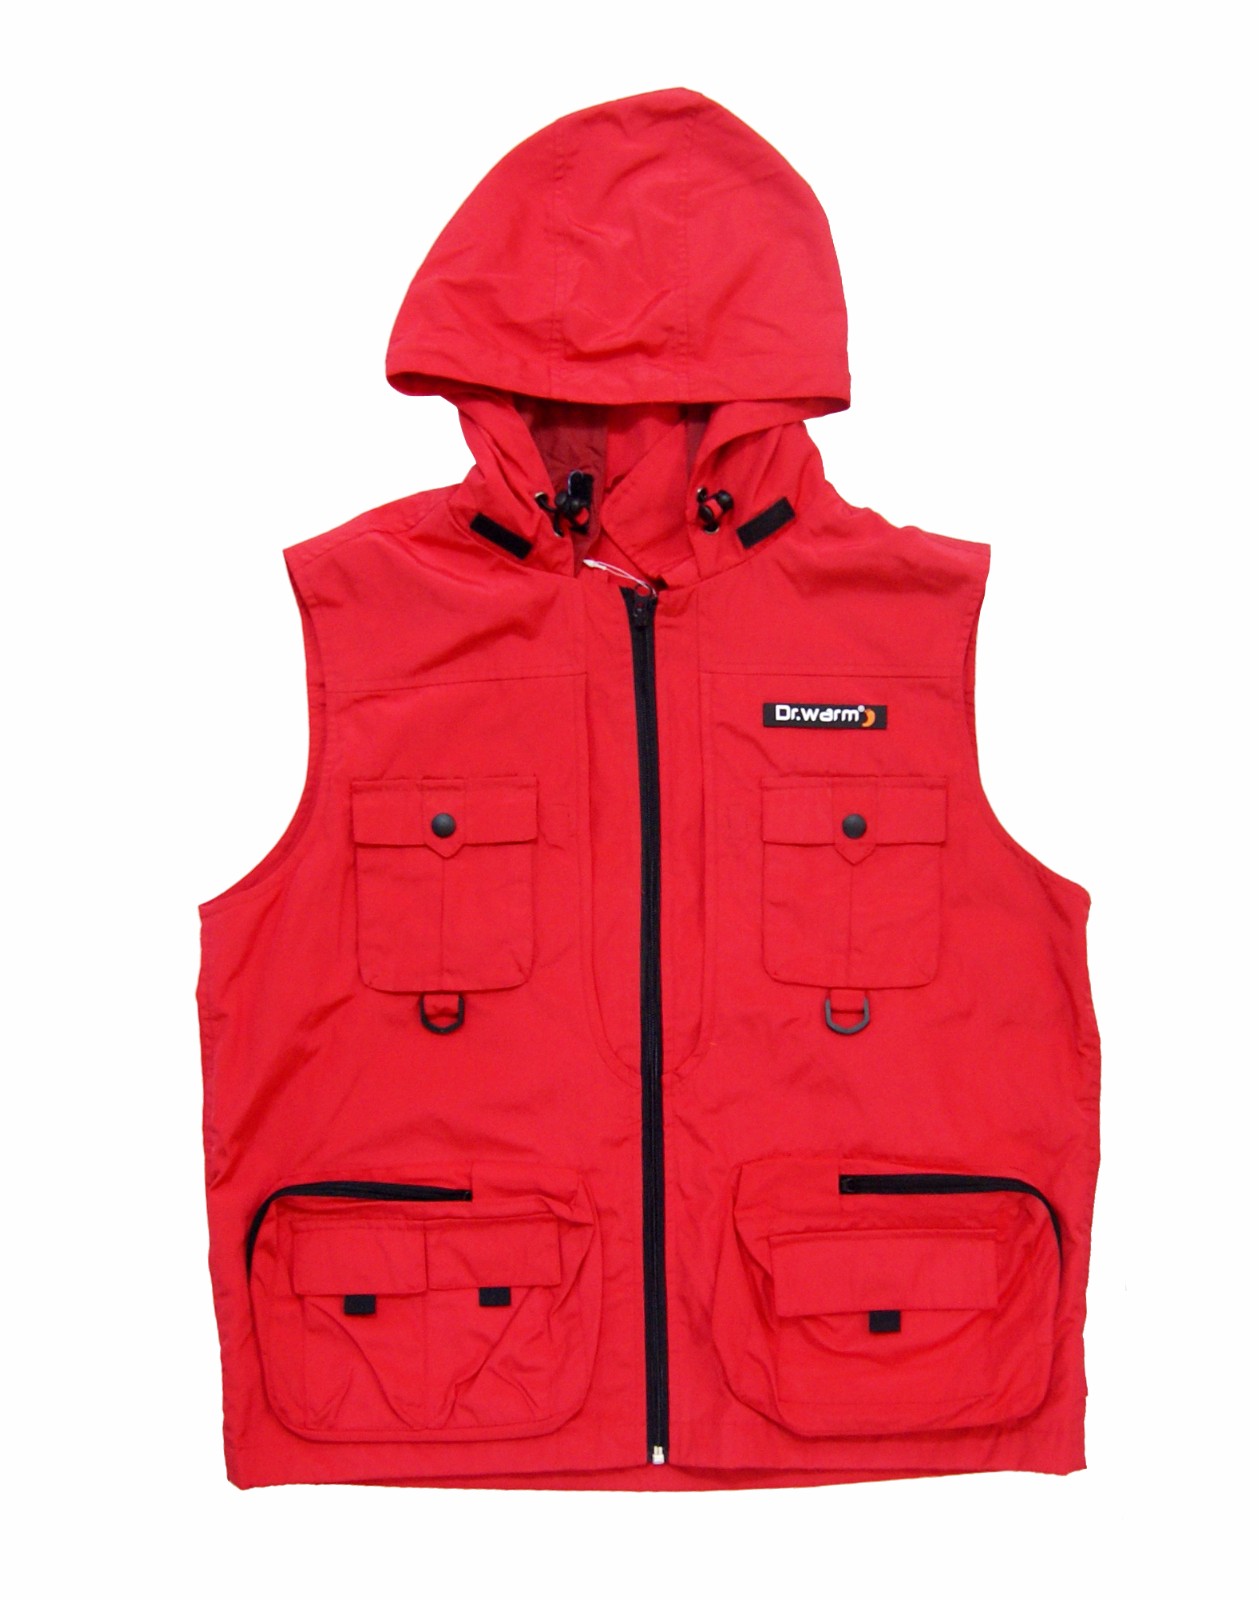 Dr. Warm fishing best women's heated vest with prined pattern for home-9